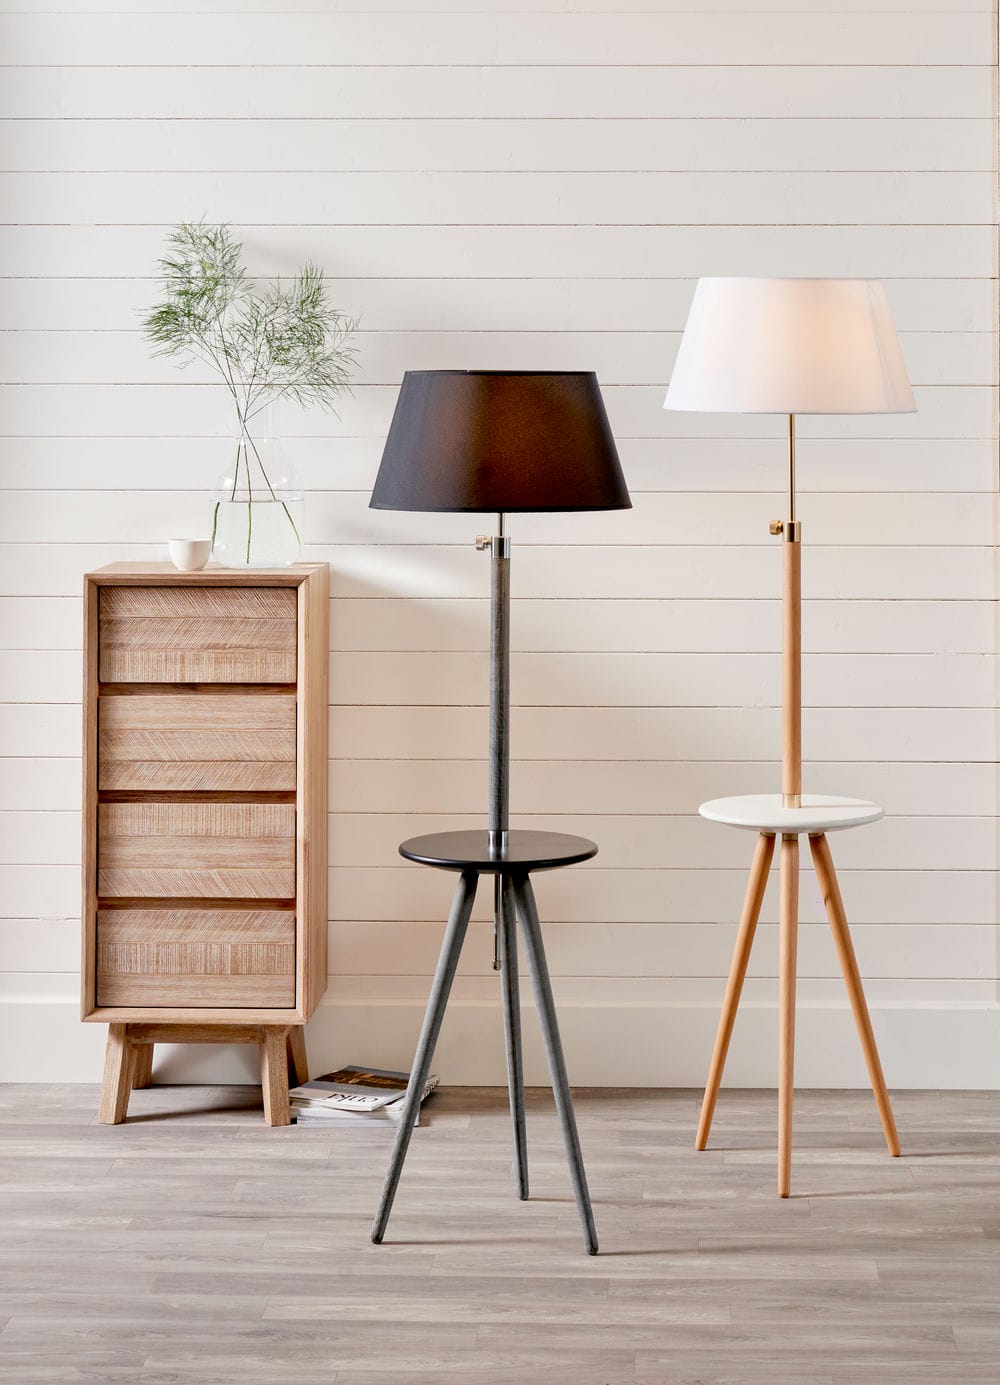 Malmo Natural Wood and White Table Floor Lamp